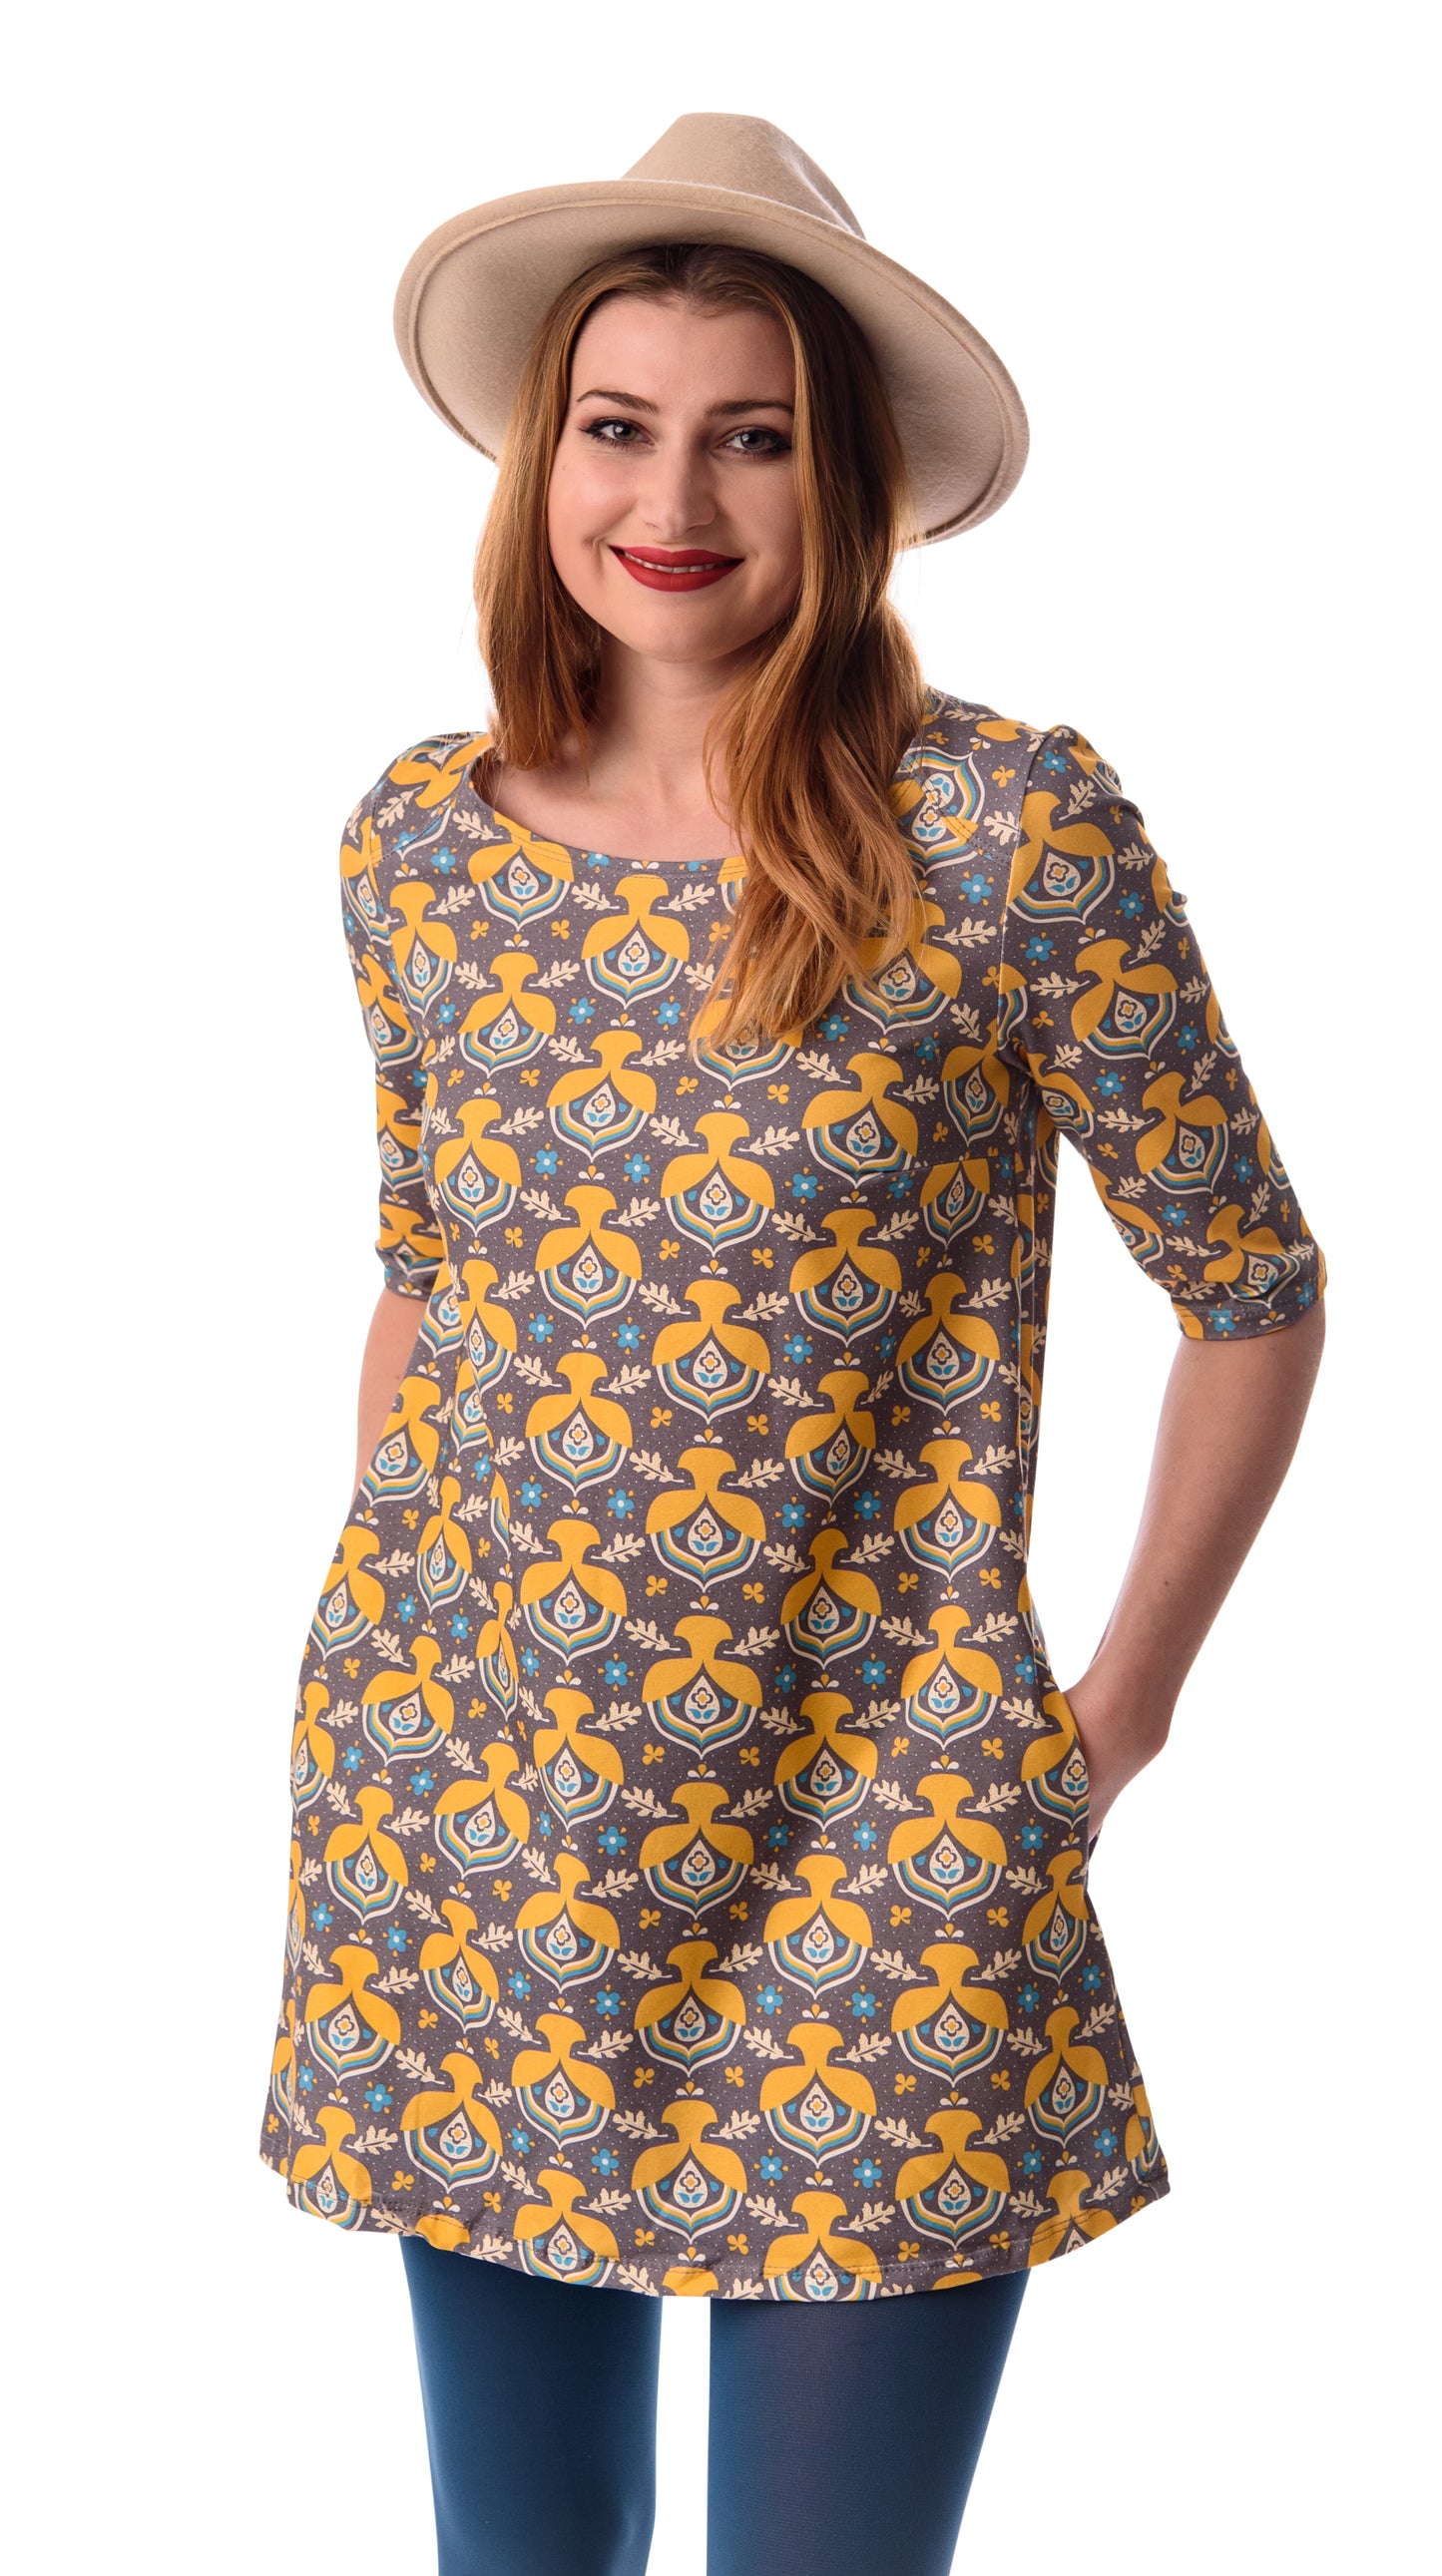 Womens a-line pocket tunic with blue, yellow and white acorn and flower print